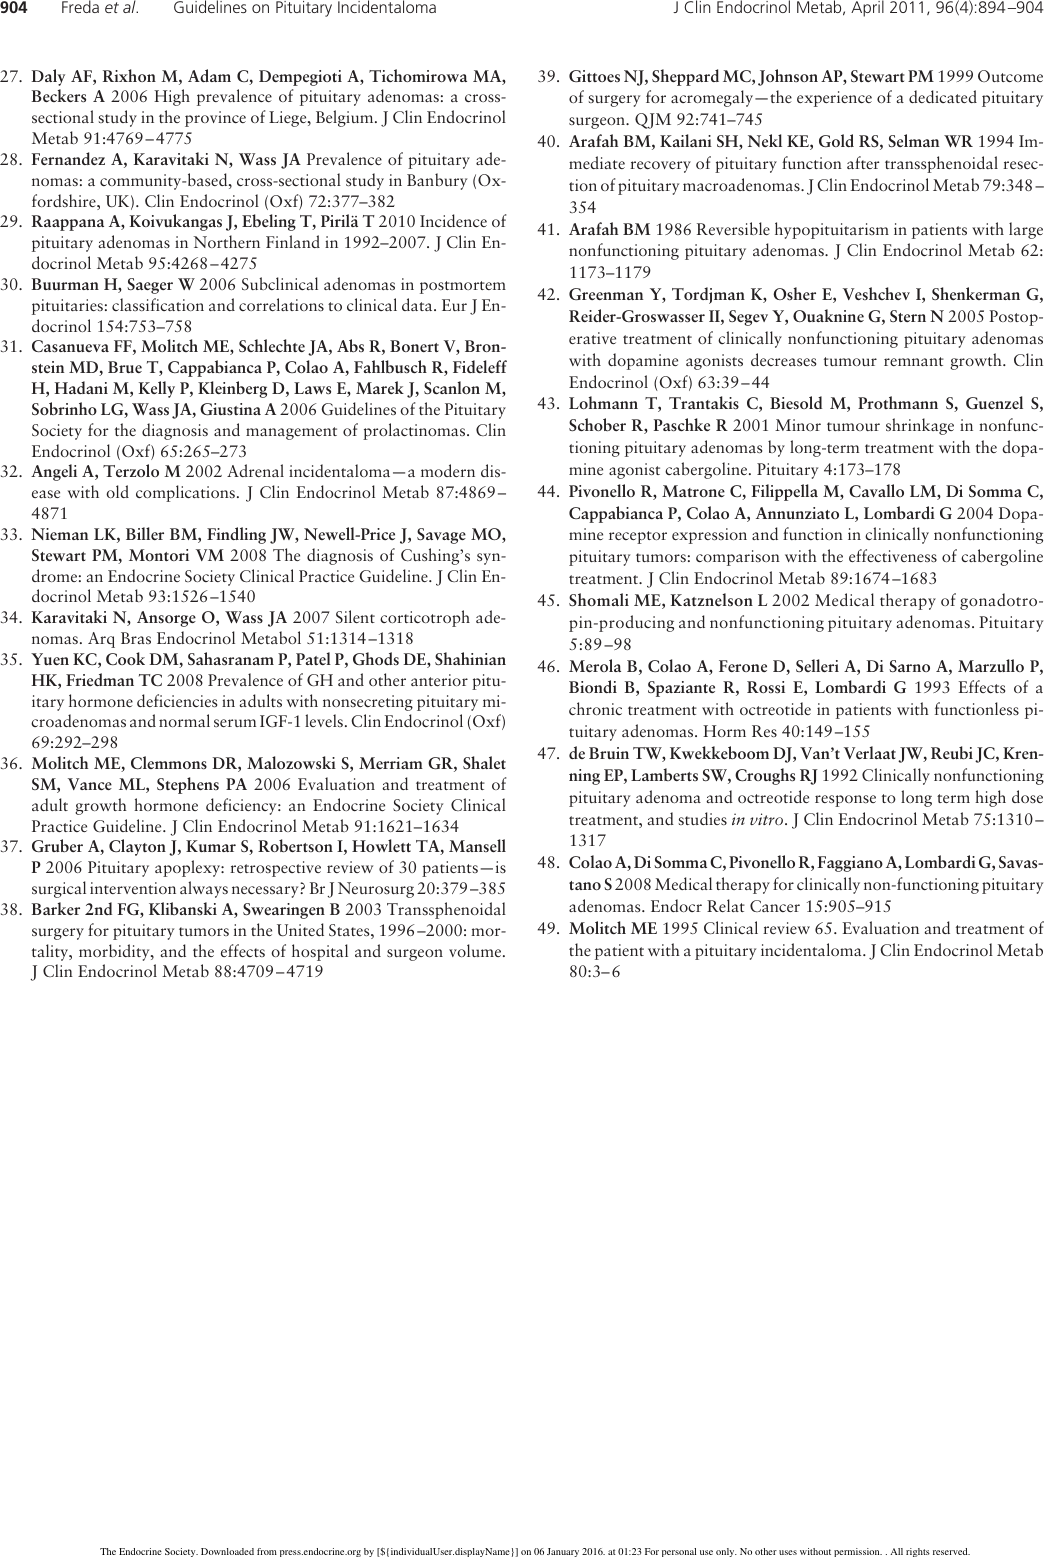 Page 11 of 11 - Pituitary Incidentaloma: An Endocrine Society Clinical Practice Guideline Incidentaloma Guide 2011